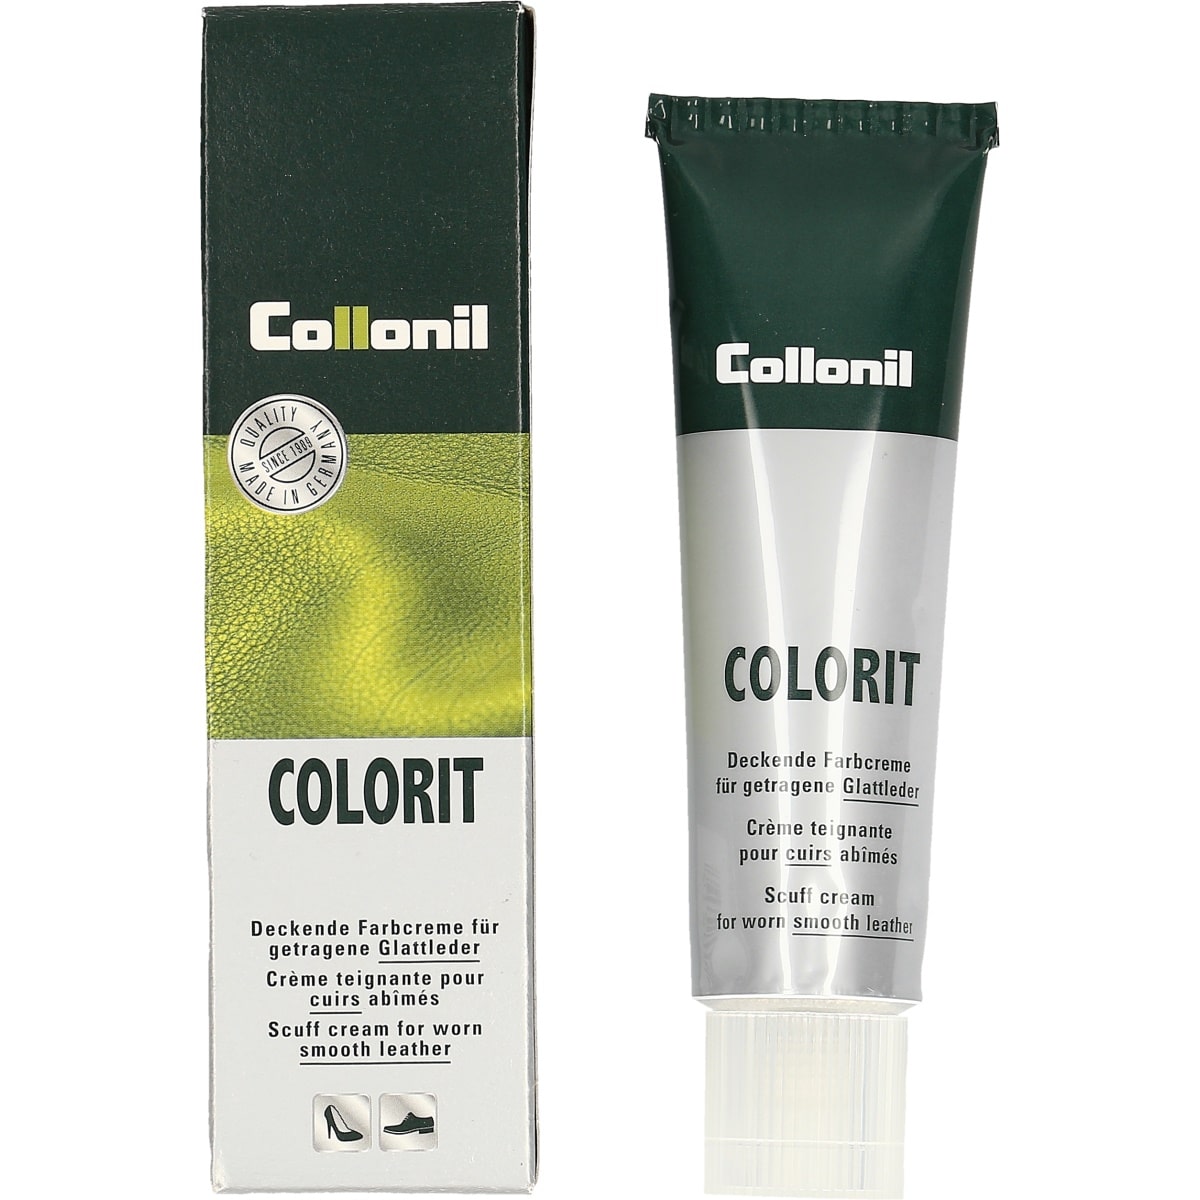 Cream Collonil Colorit Polish cleans, cares, conditions and shines leather